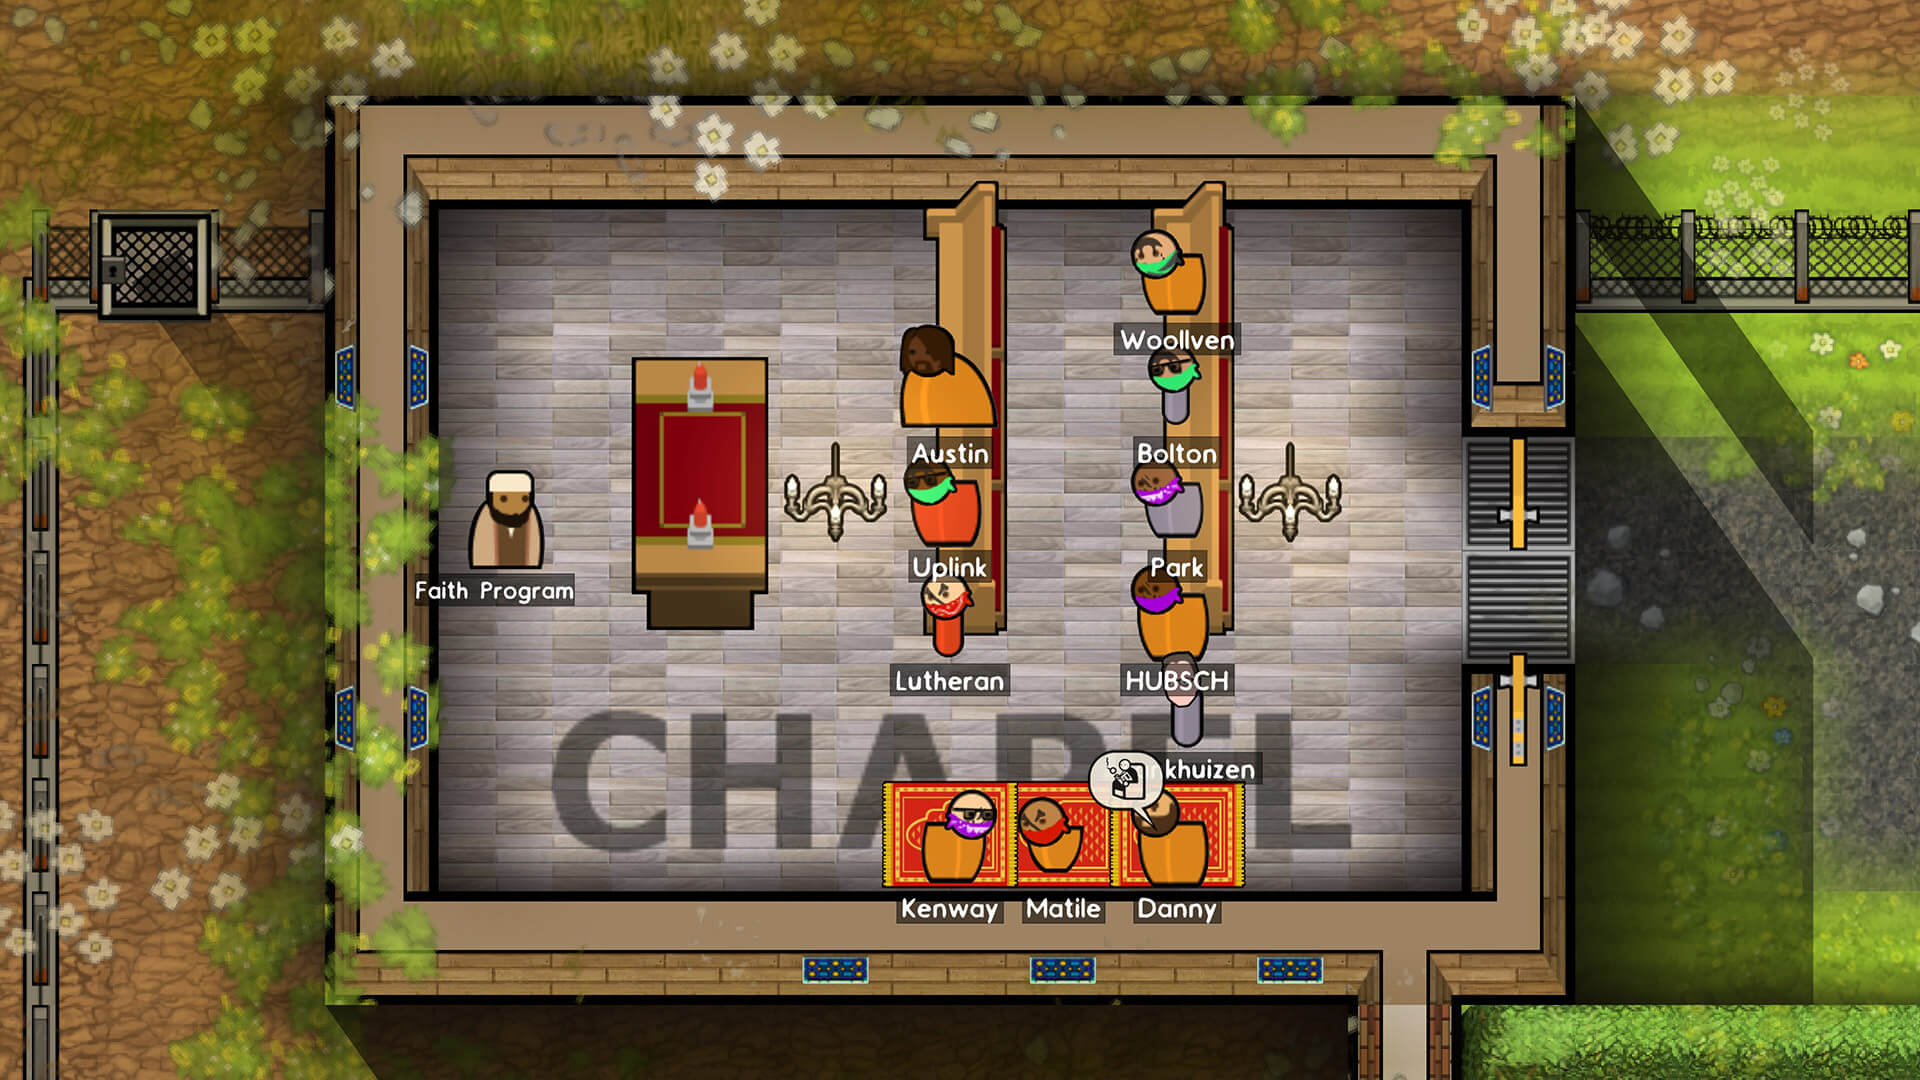 Some gang members in the faith program in Prison Architect